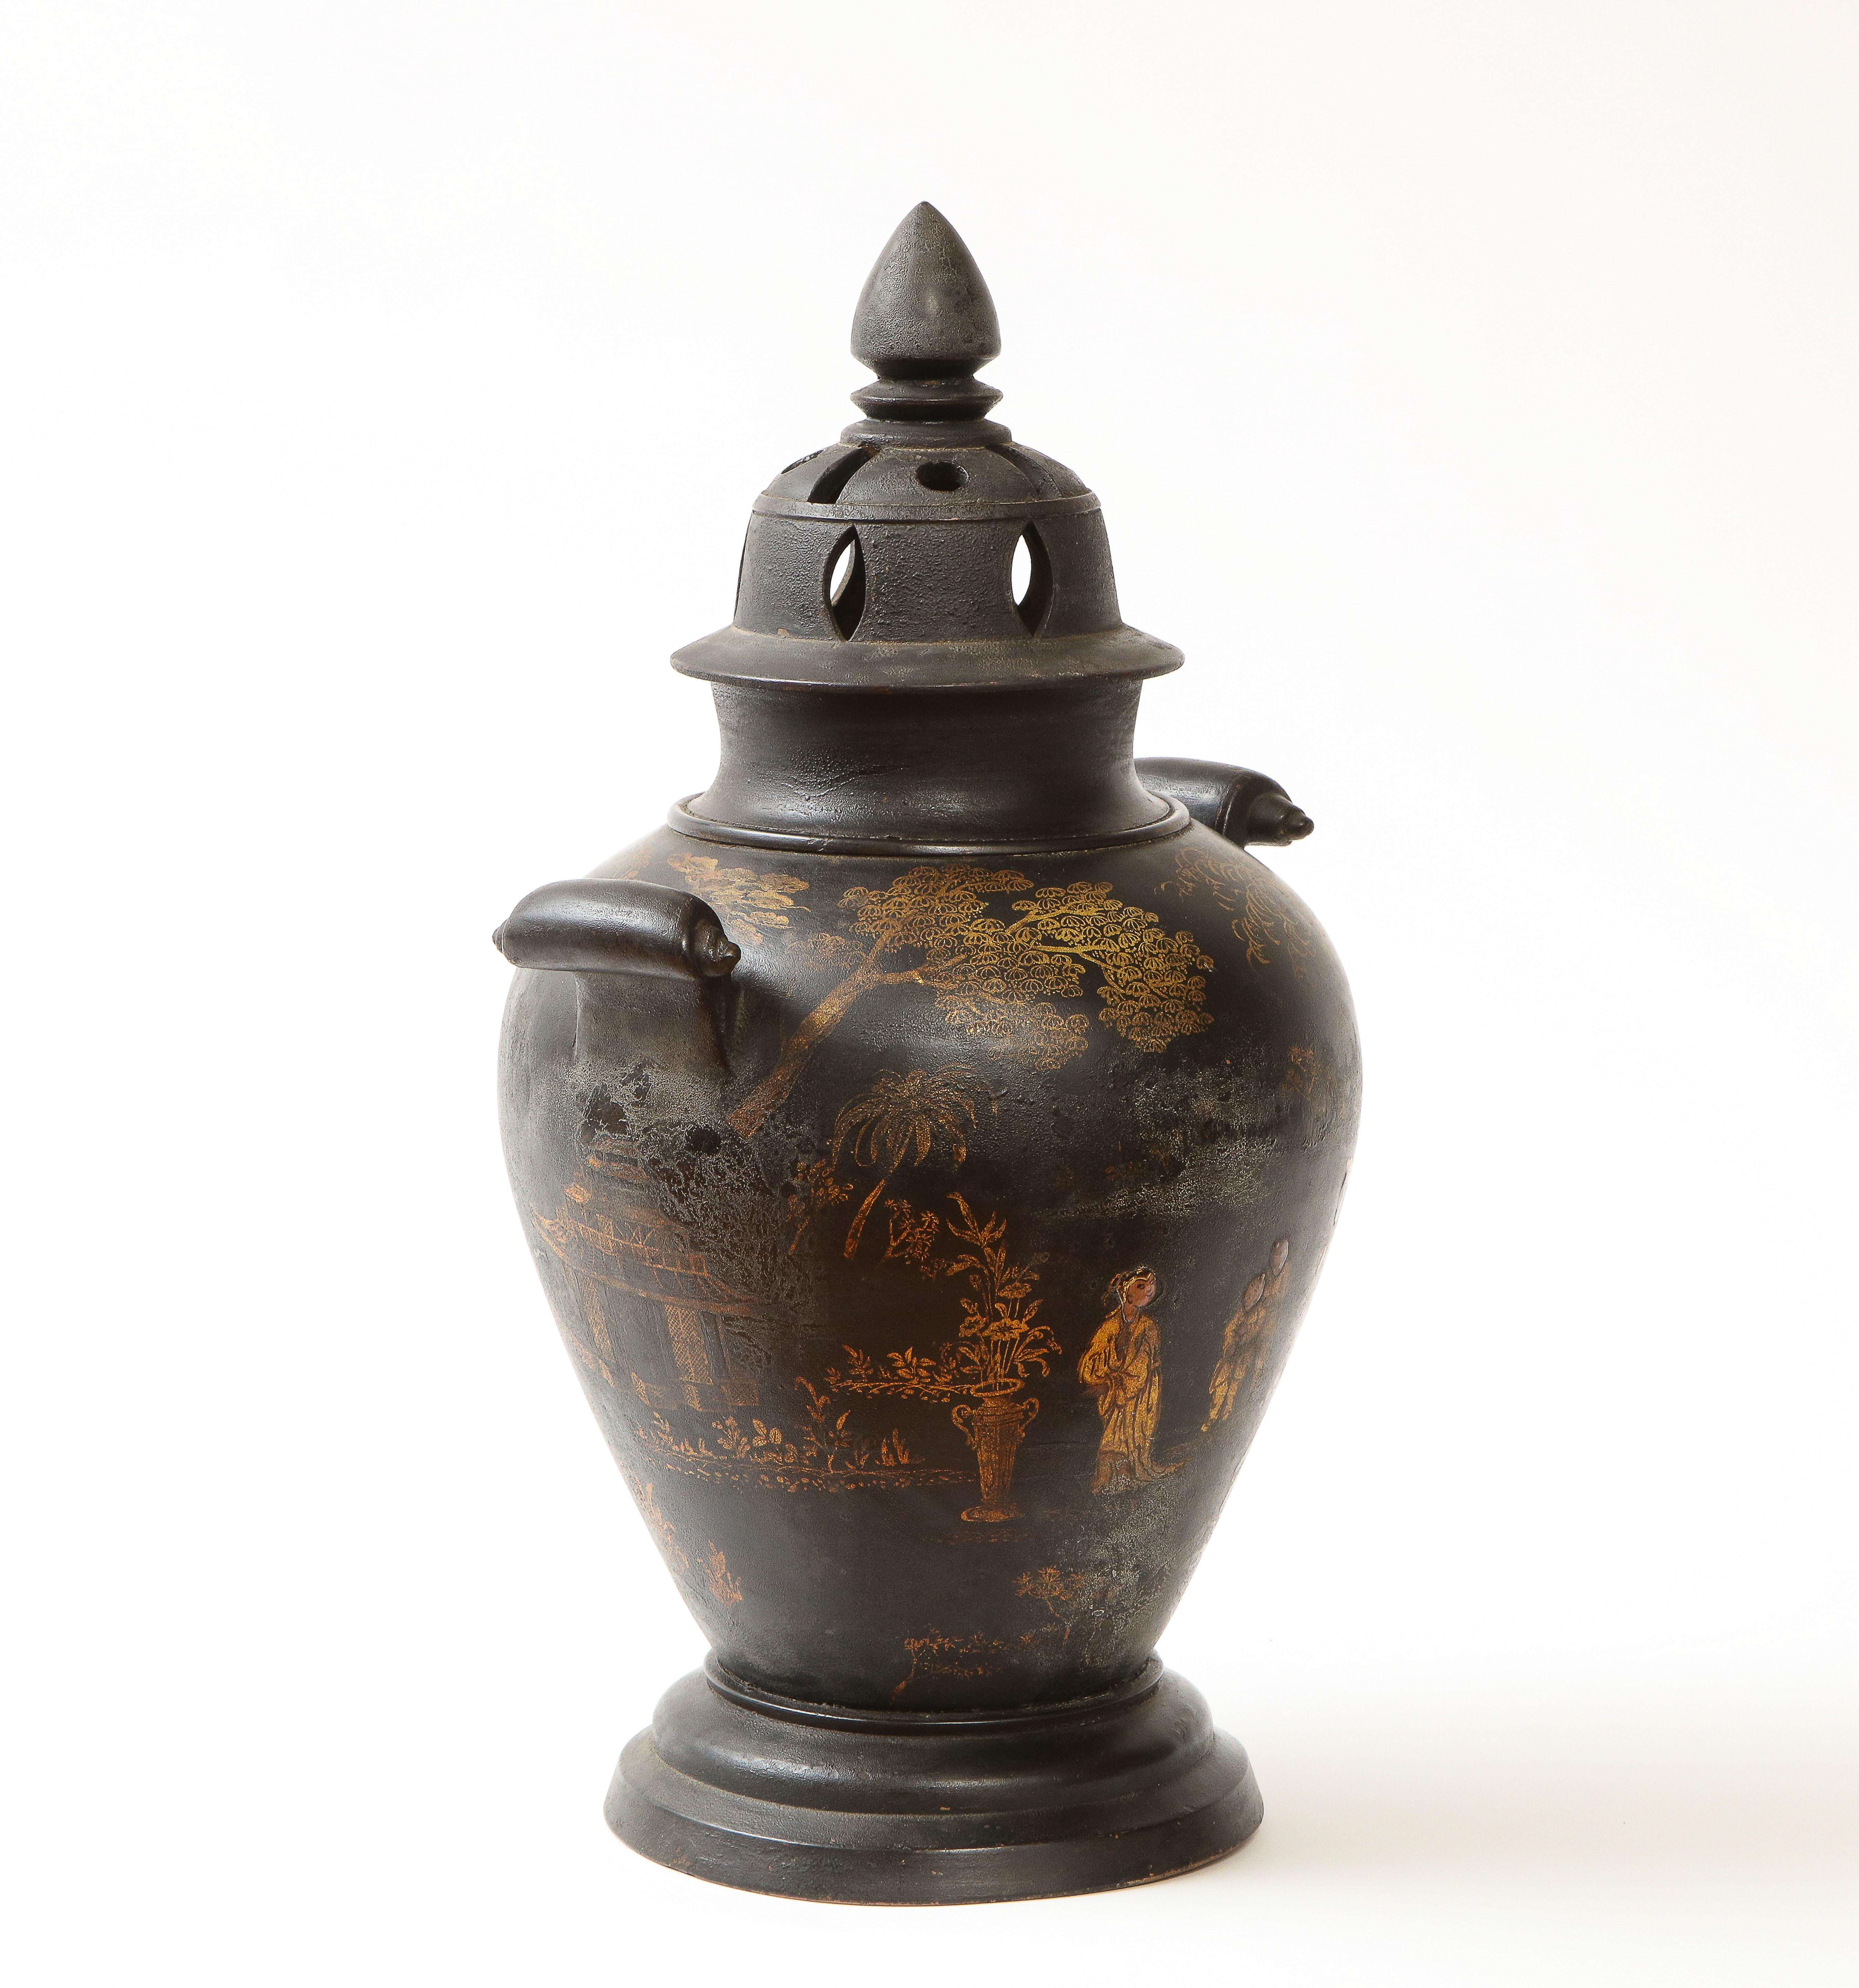 Of ginger jar shape with outscrolled handles, surmounted by a pierced lid with knob-form finial; decorated with Court figures in a pagoda riverscape.